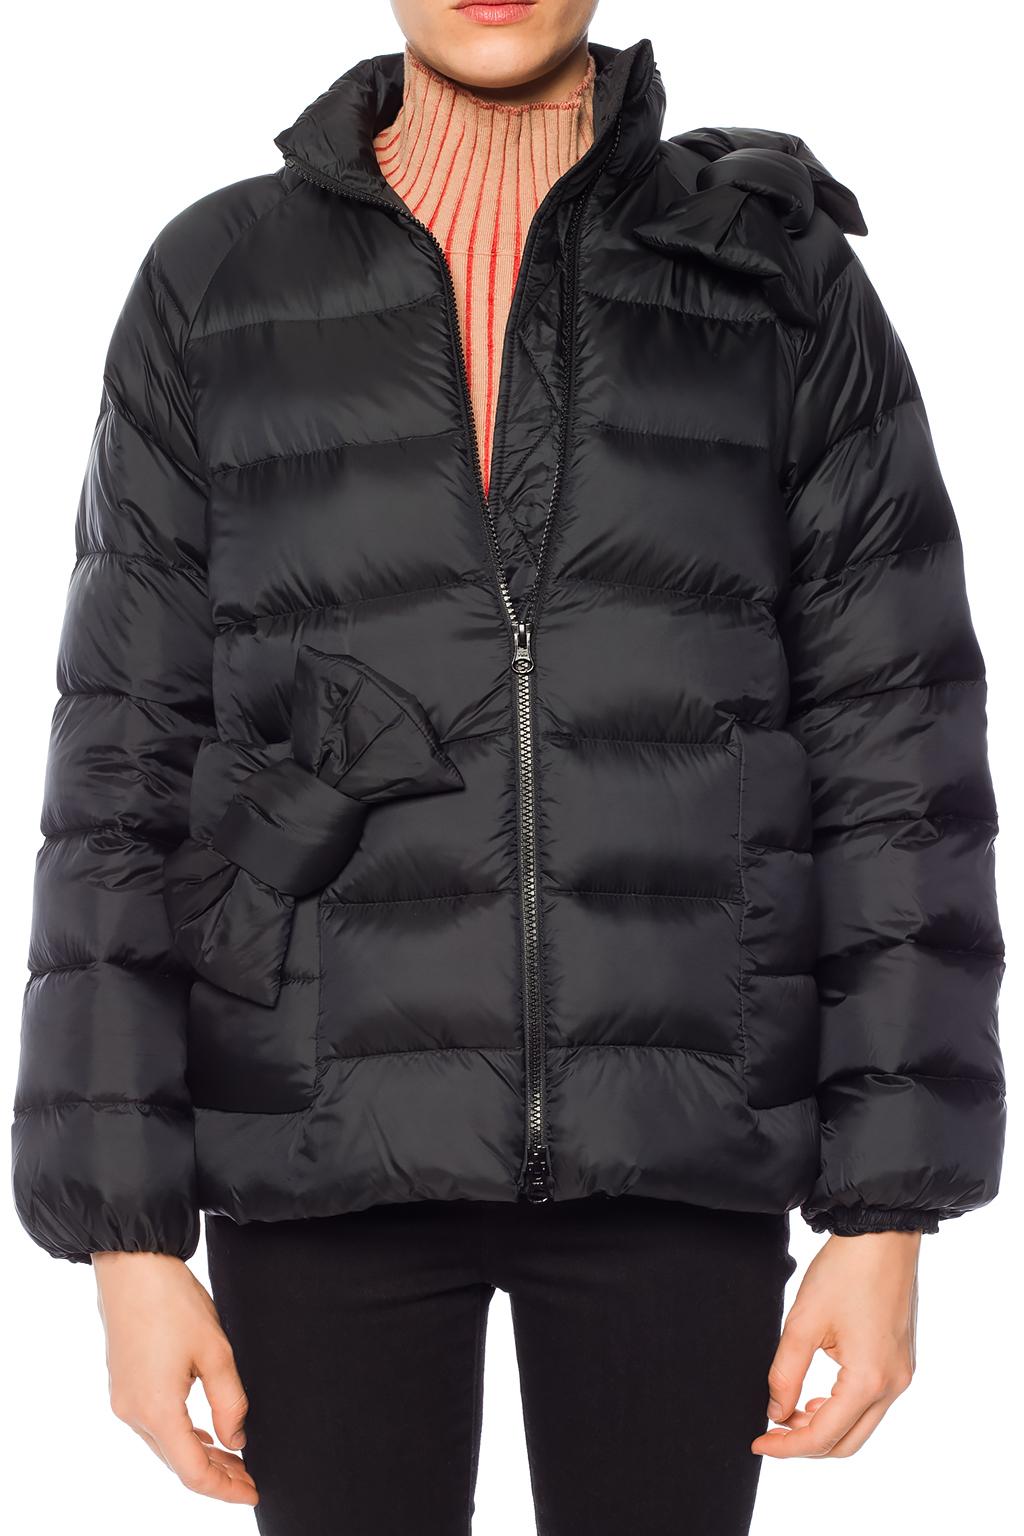 Red Valentino Down jacket with bows | Women's Clothing | Vitkac